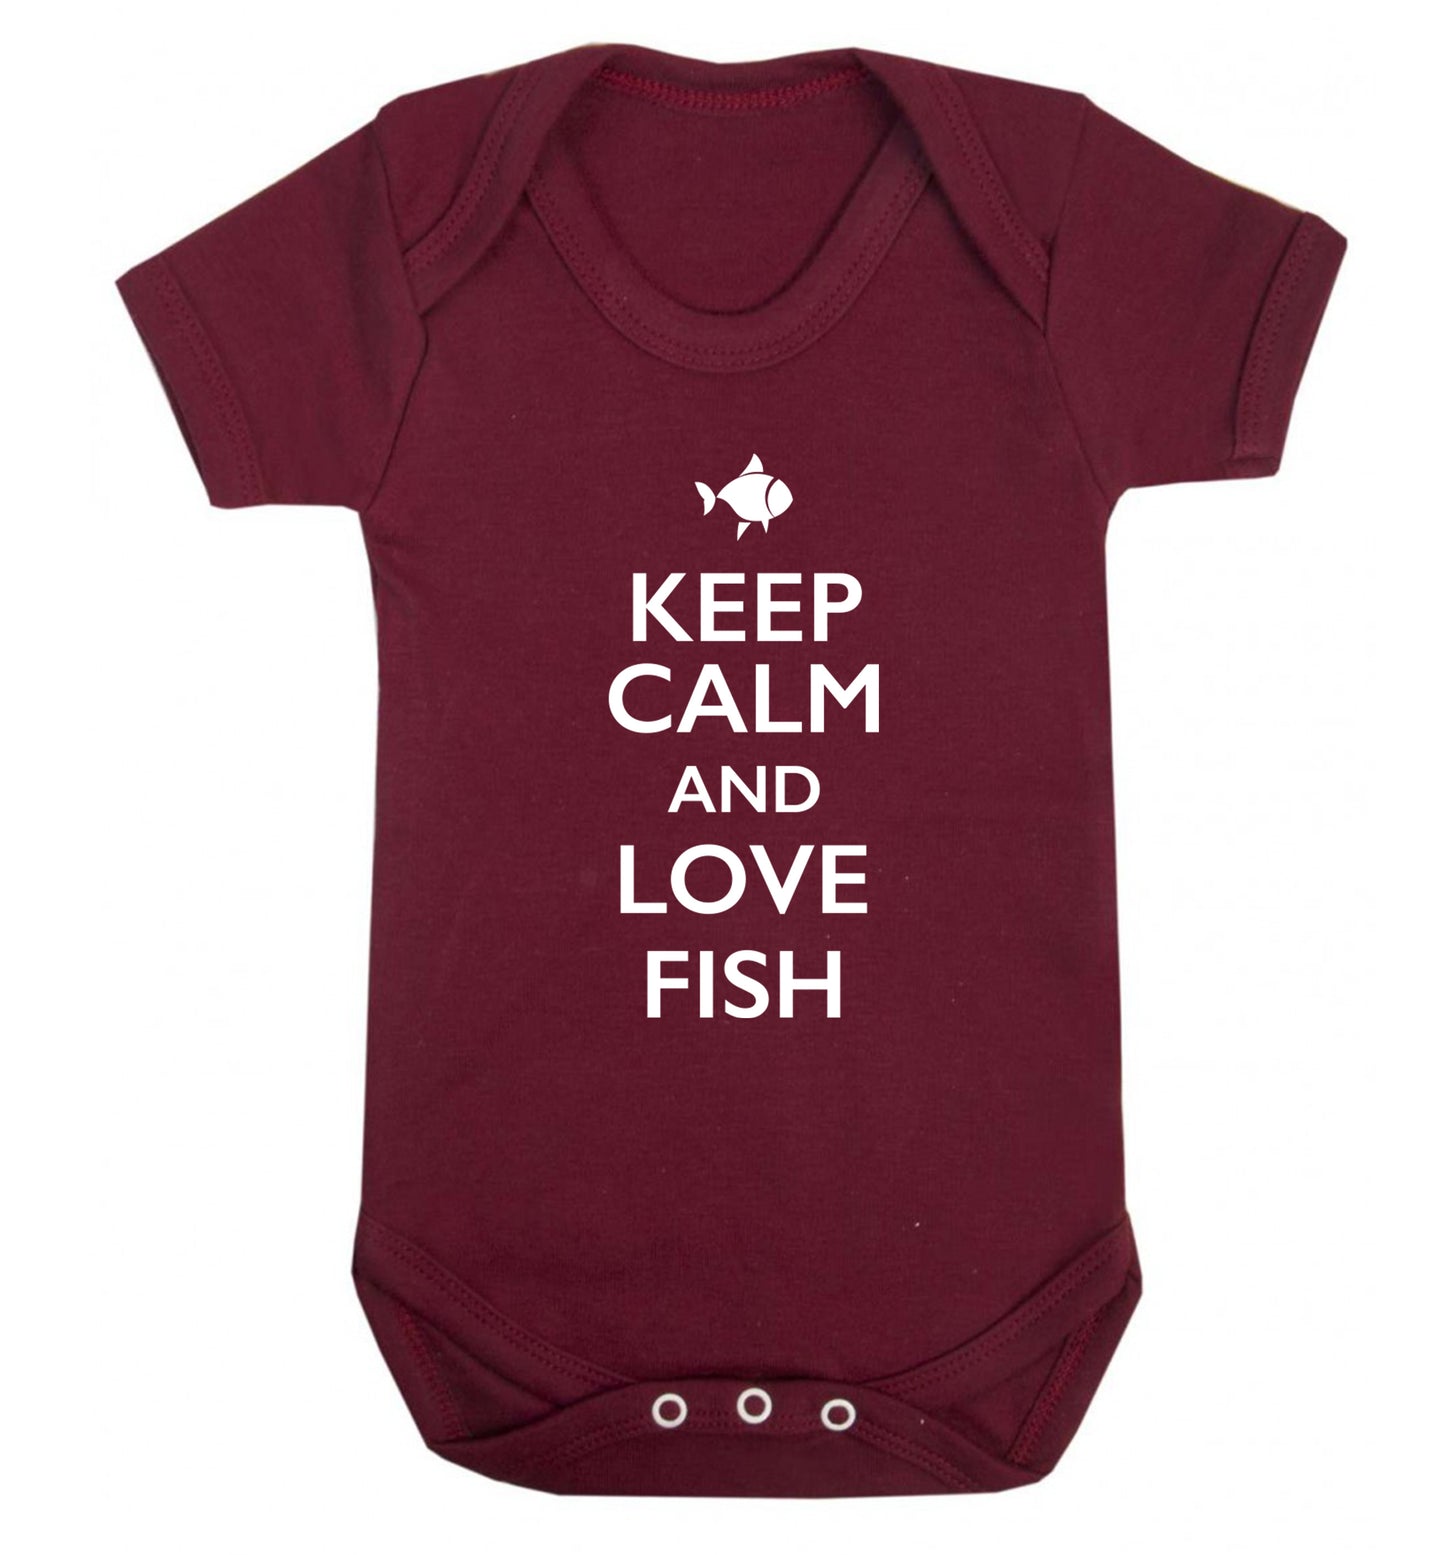 Keep calm and love fish Baby Vest maroon 18-24 months